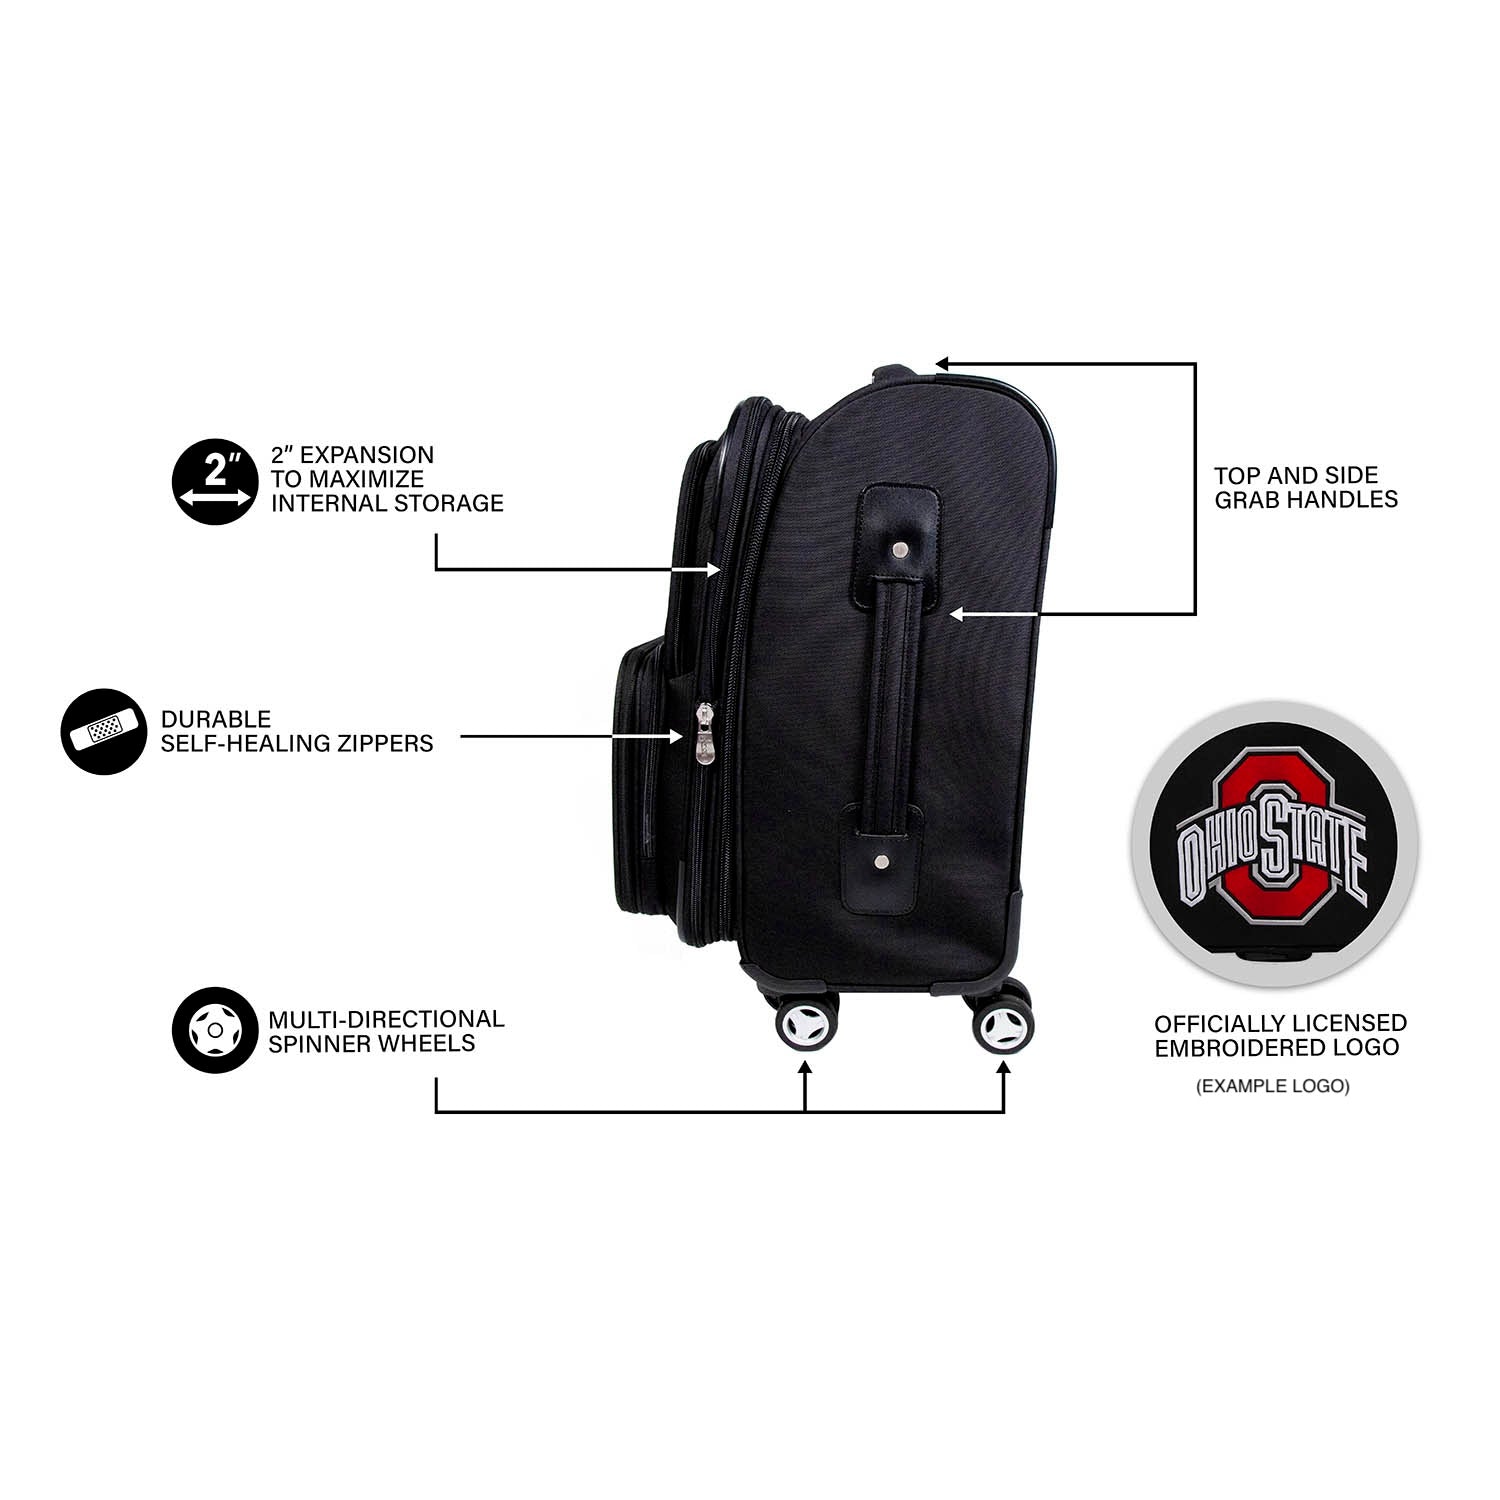 Maryland Terrapins Carry-on Spinner Softside